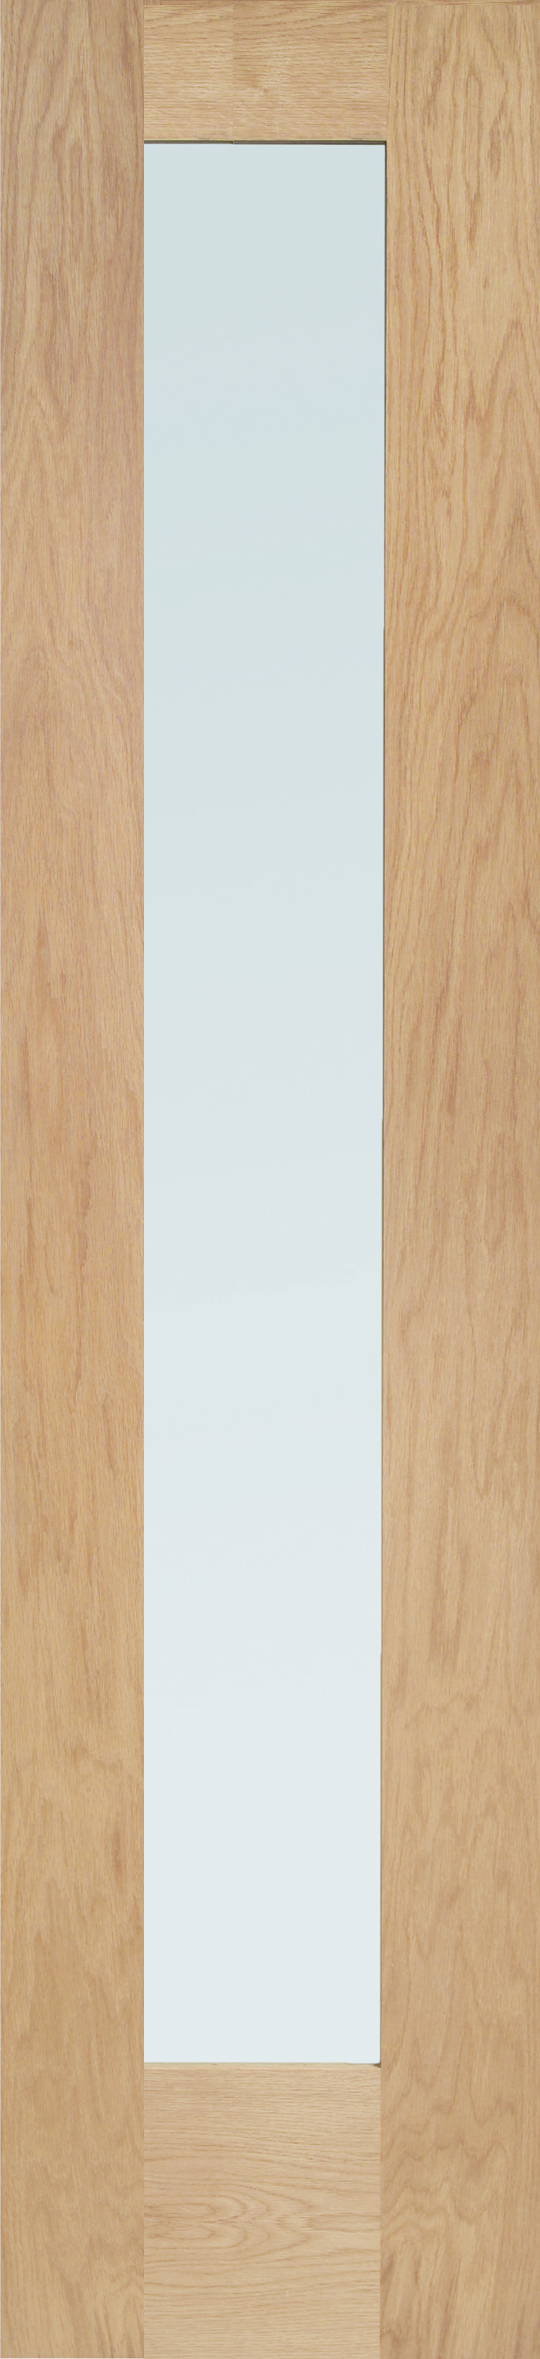 Oak Pattern 10 Panelled French Doors with Demi Panels 